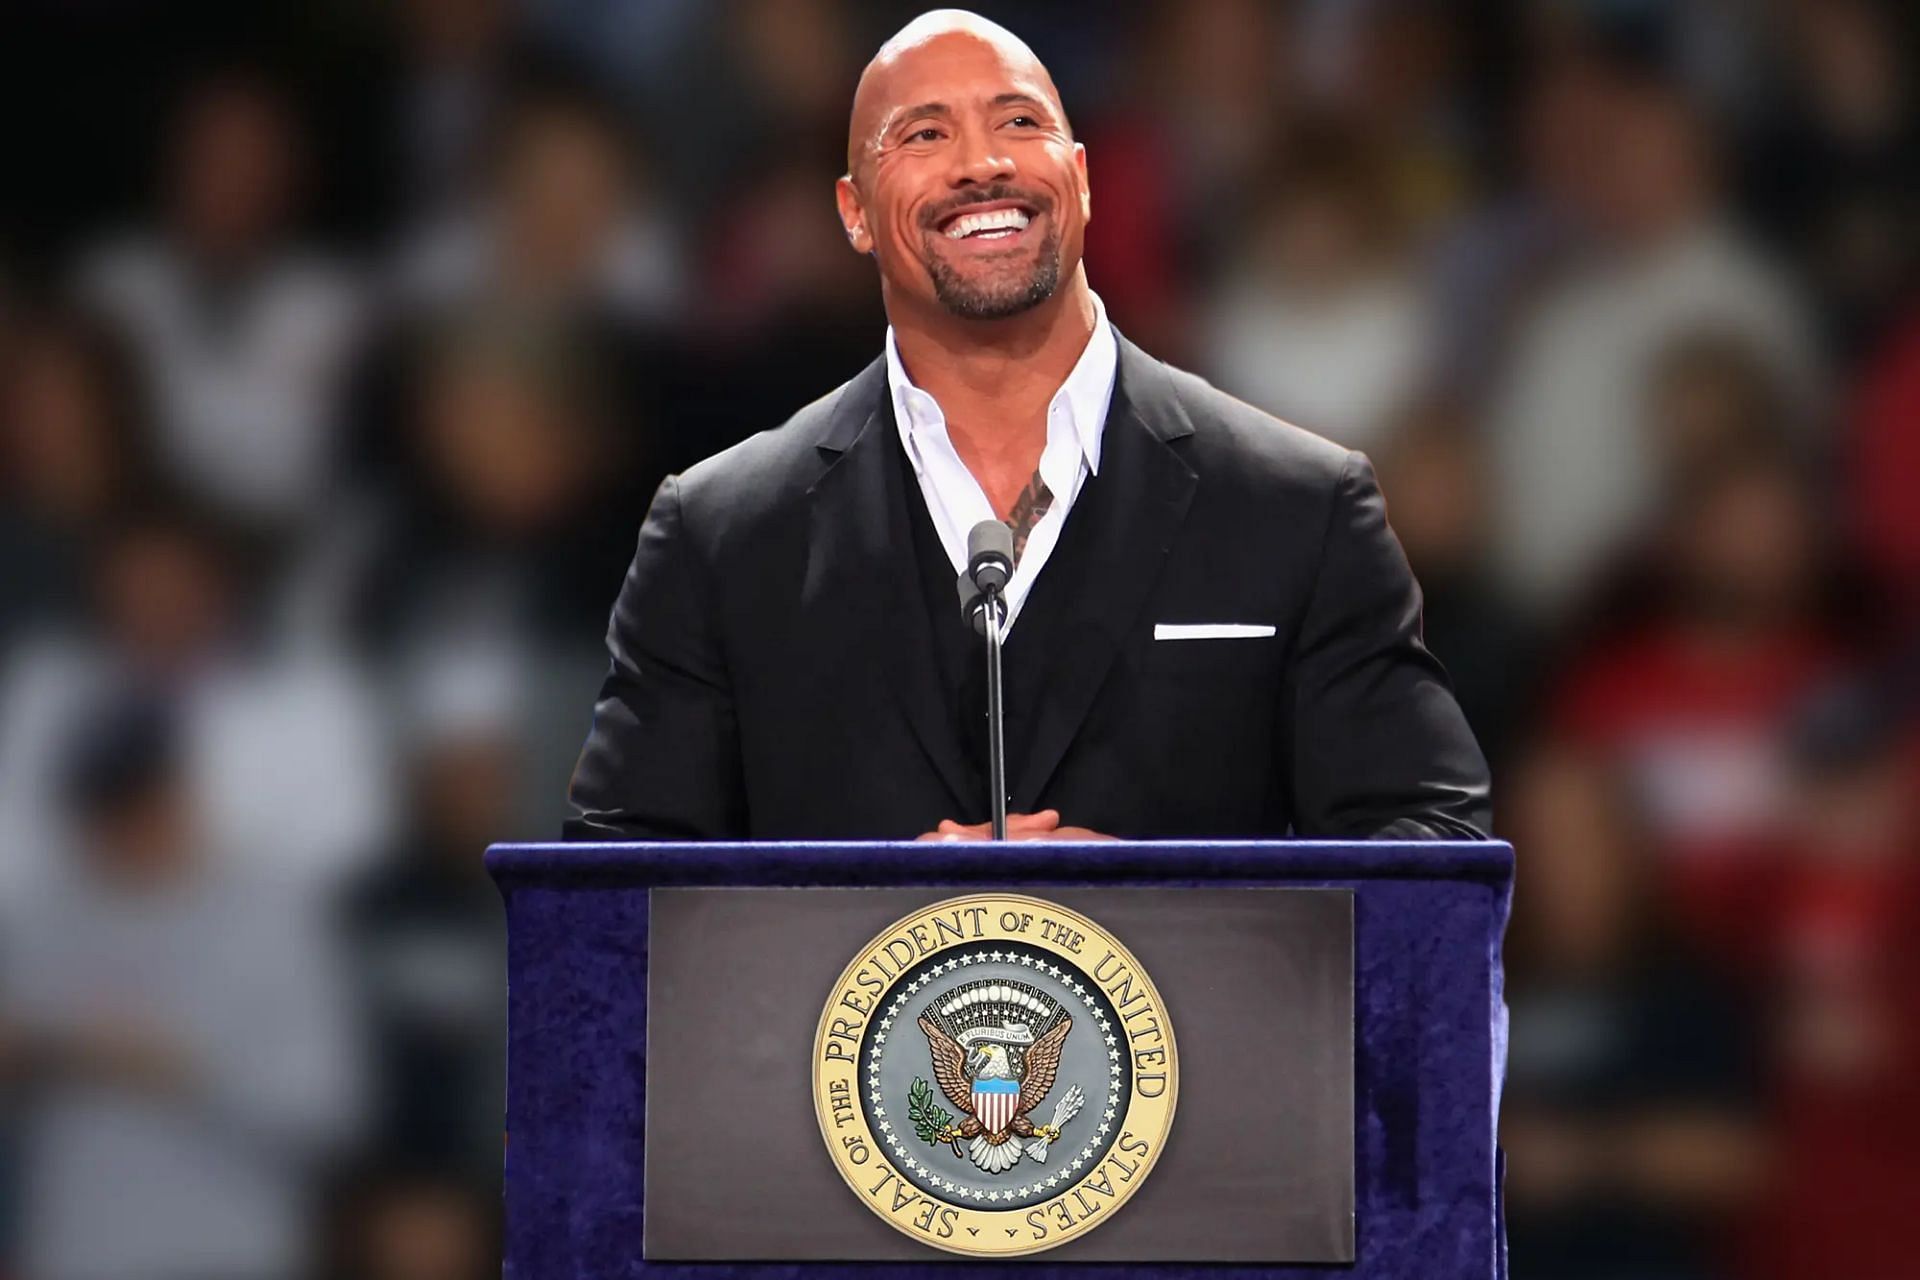 Dwayne Johnson has been favored as a potential US Presidential candidate.